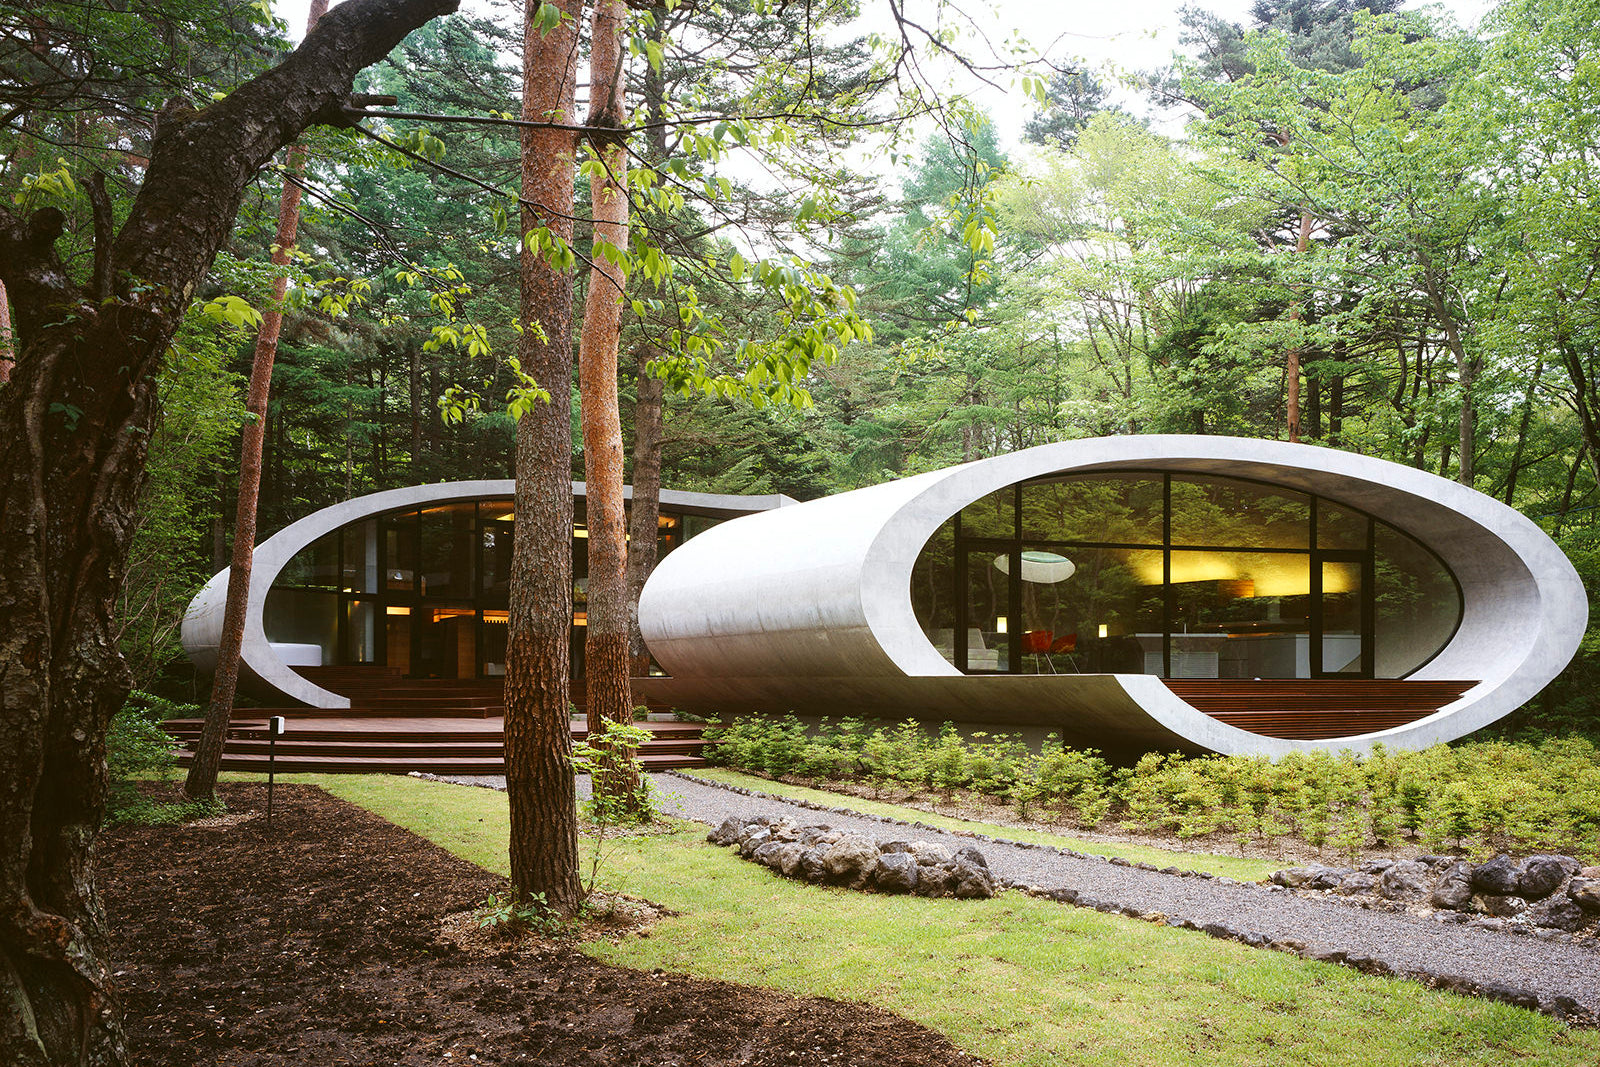 Massive Reinforced Concrete Shell Blends The Nature In Japan